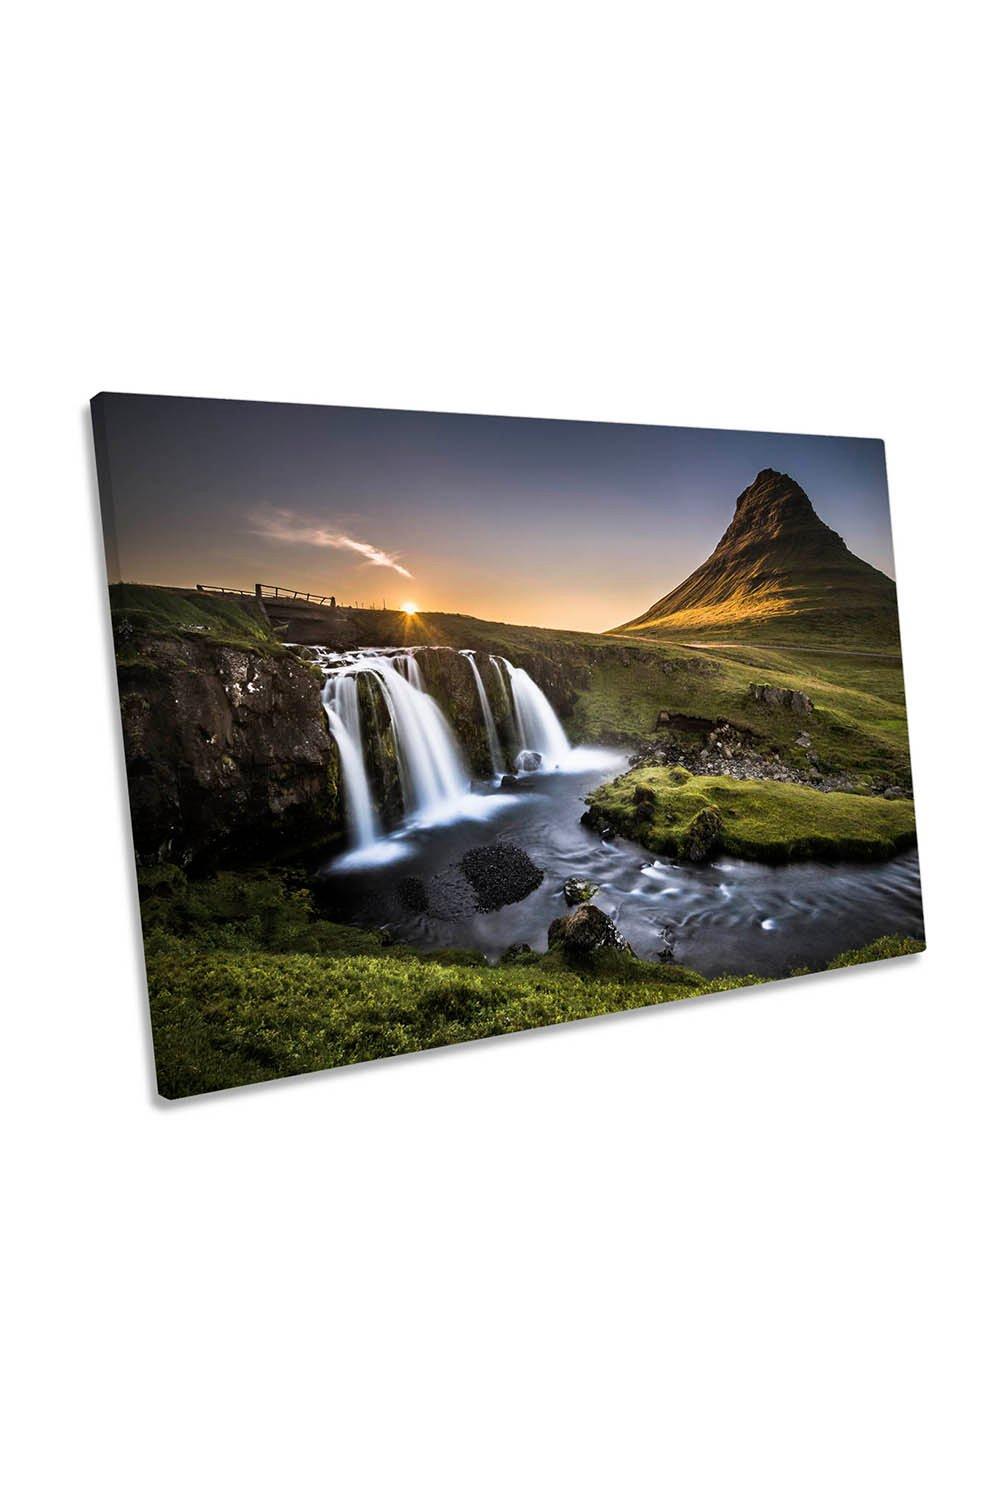 Fairy Tale Country Kirkjufell Waterfall Canvas Wall Art Picture Print